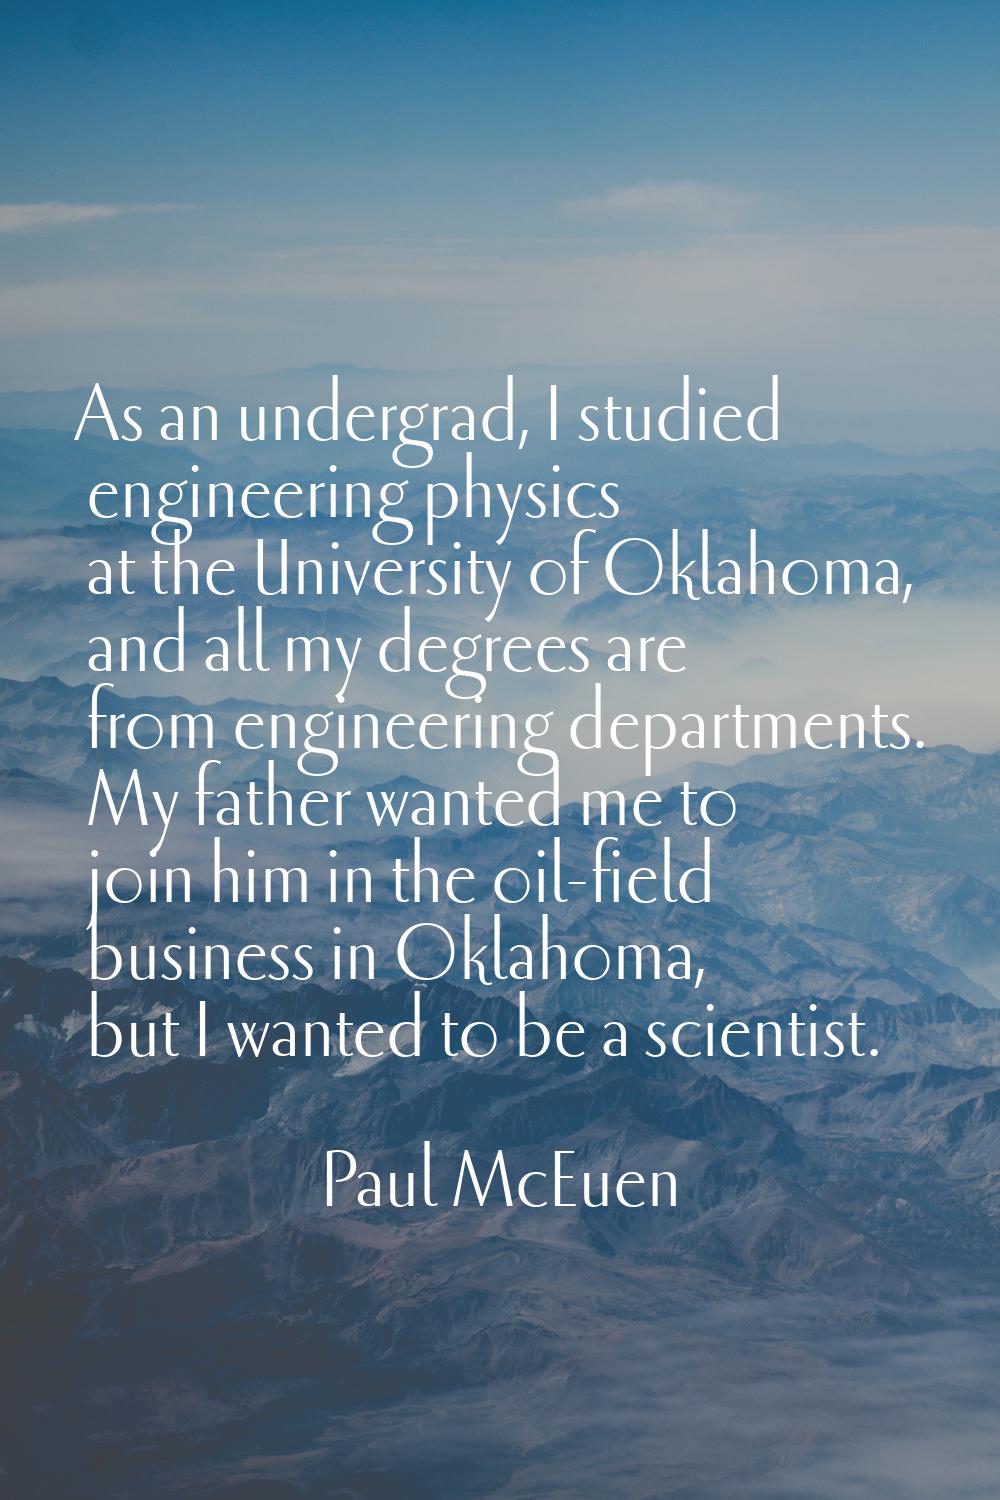 As an undergrad, I studied engineering physics at the University of Oklahoma, and all my degrees ar